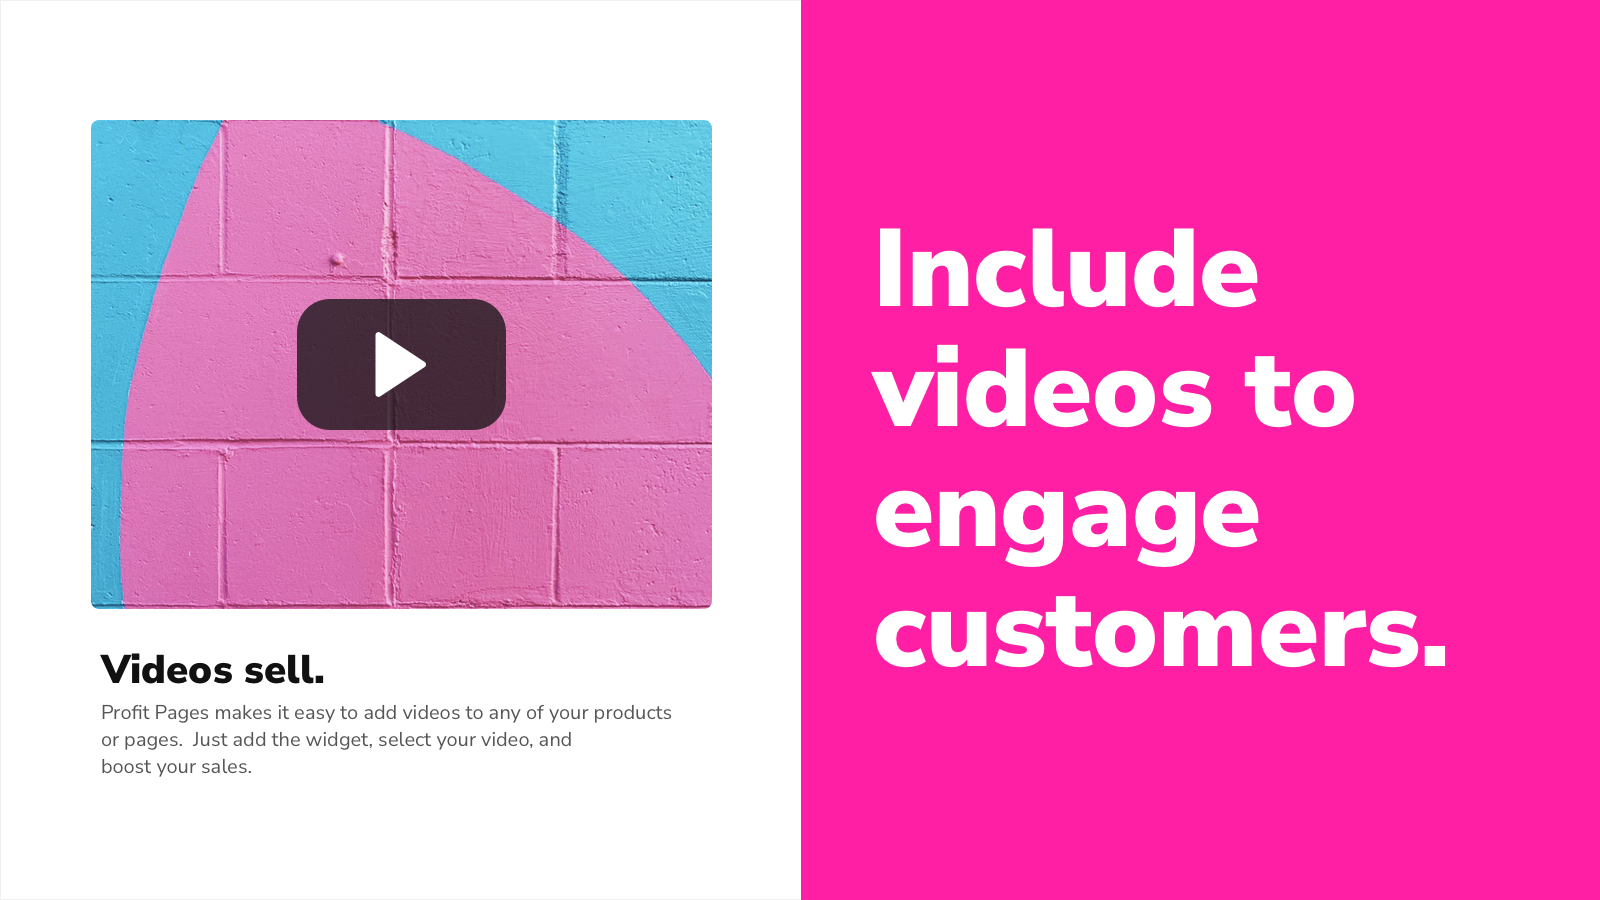 Include videos to engage customers.